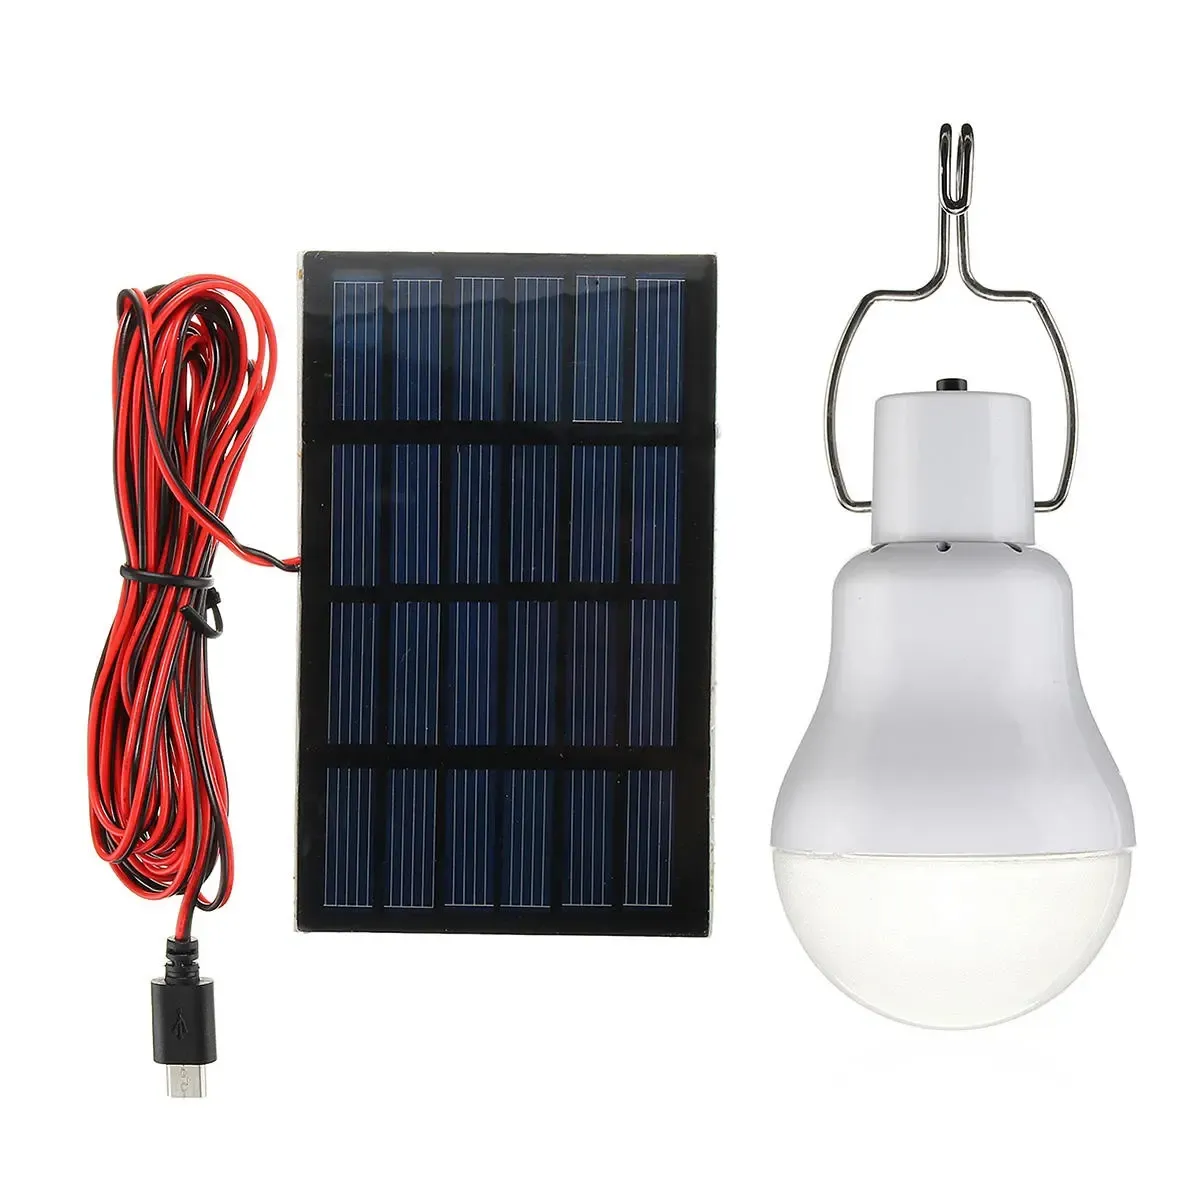 5V 1W Solar Panel Powered LED Bulb Light Portable Outdoor Camping Tent Energy LampAlso can charge the battery by 5-8V charger